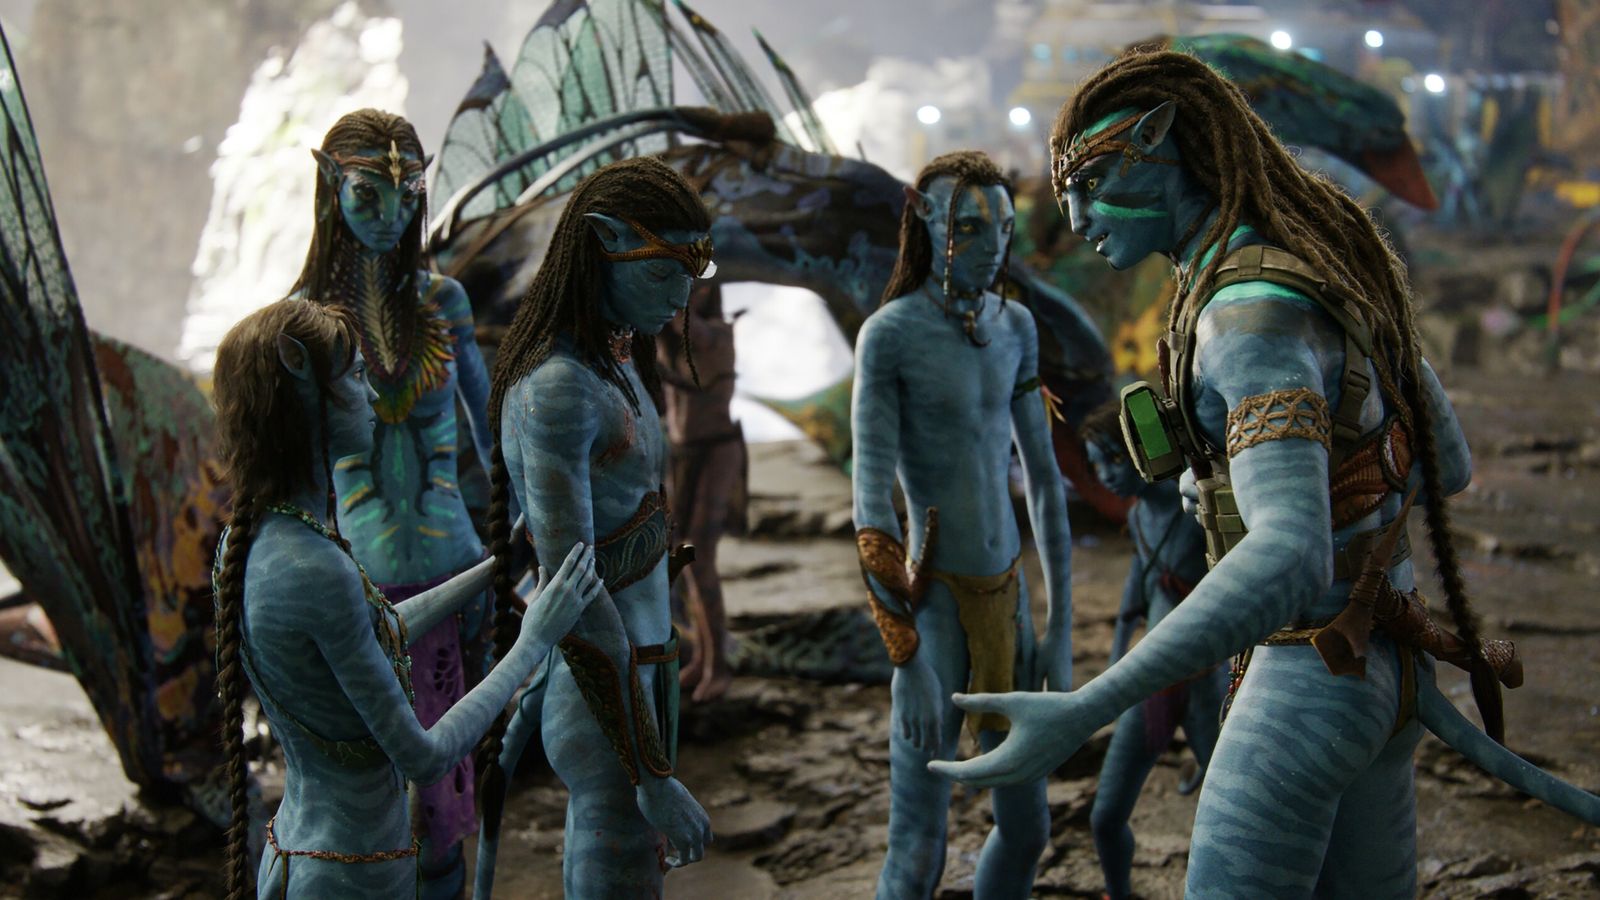 Avatar is back after 13 years - but will the sequel live up to the original?